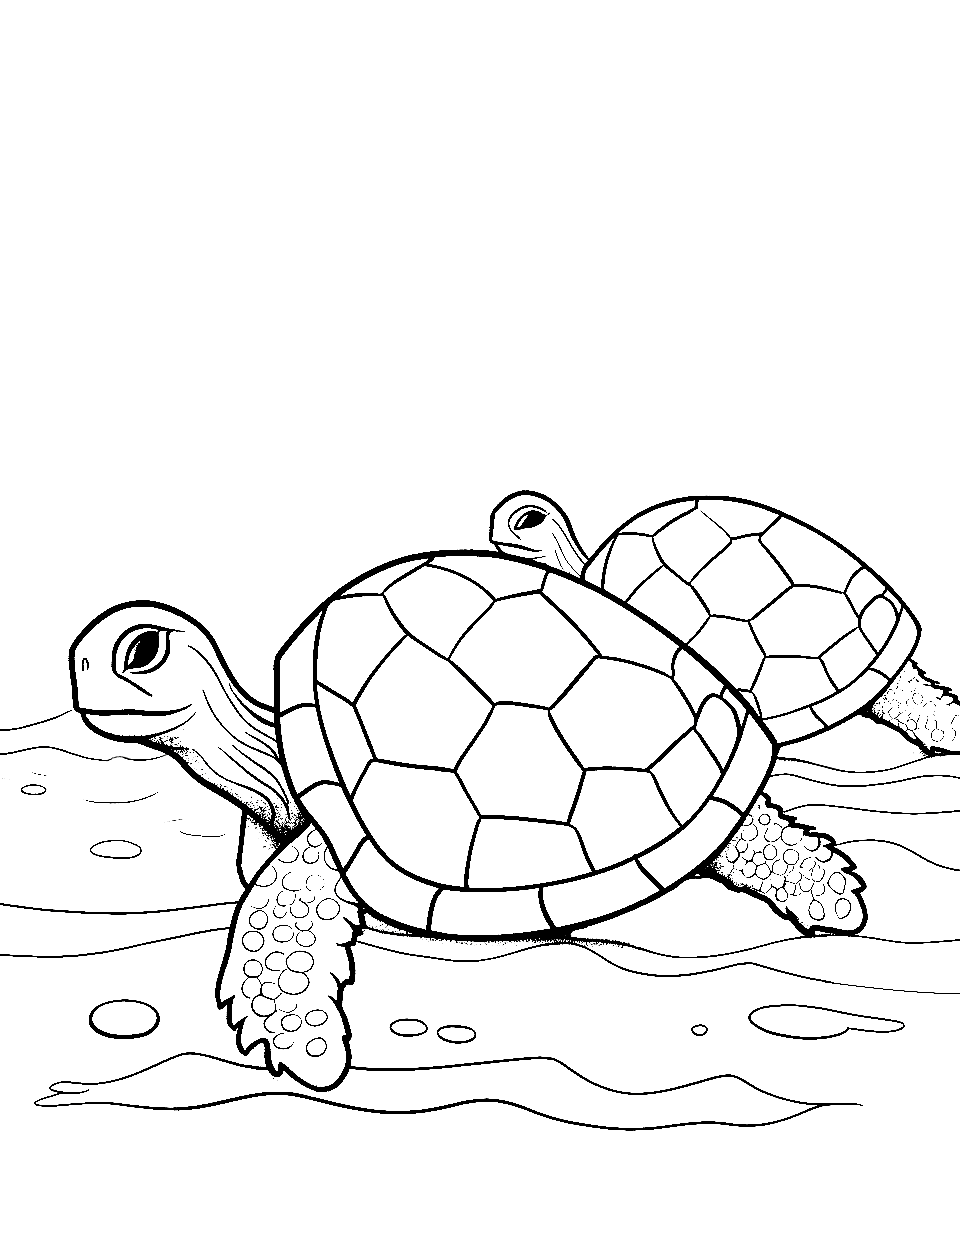 Turtle Parade Coloring Page - Several turtles, one after another, heading towards a refreshing pond.